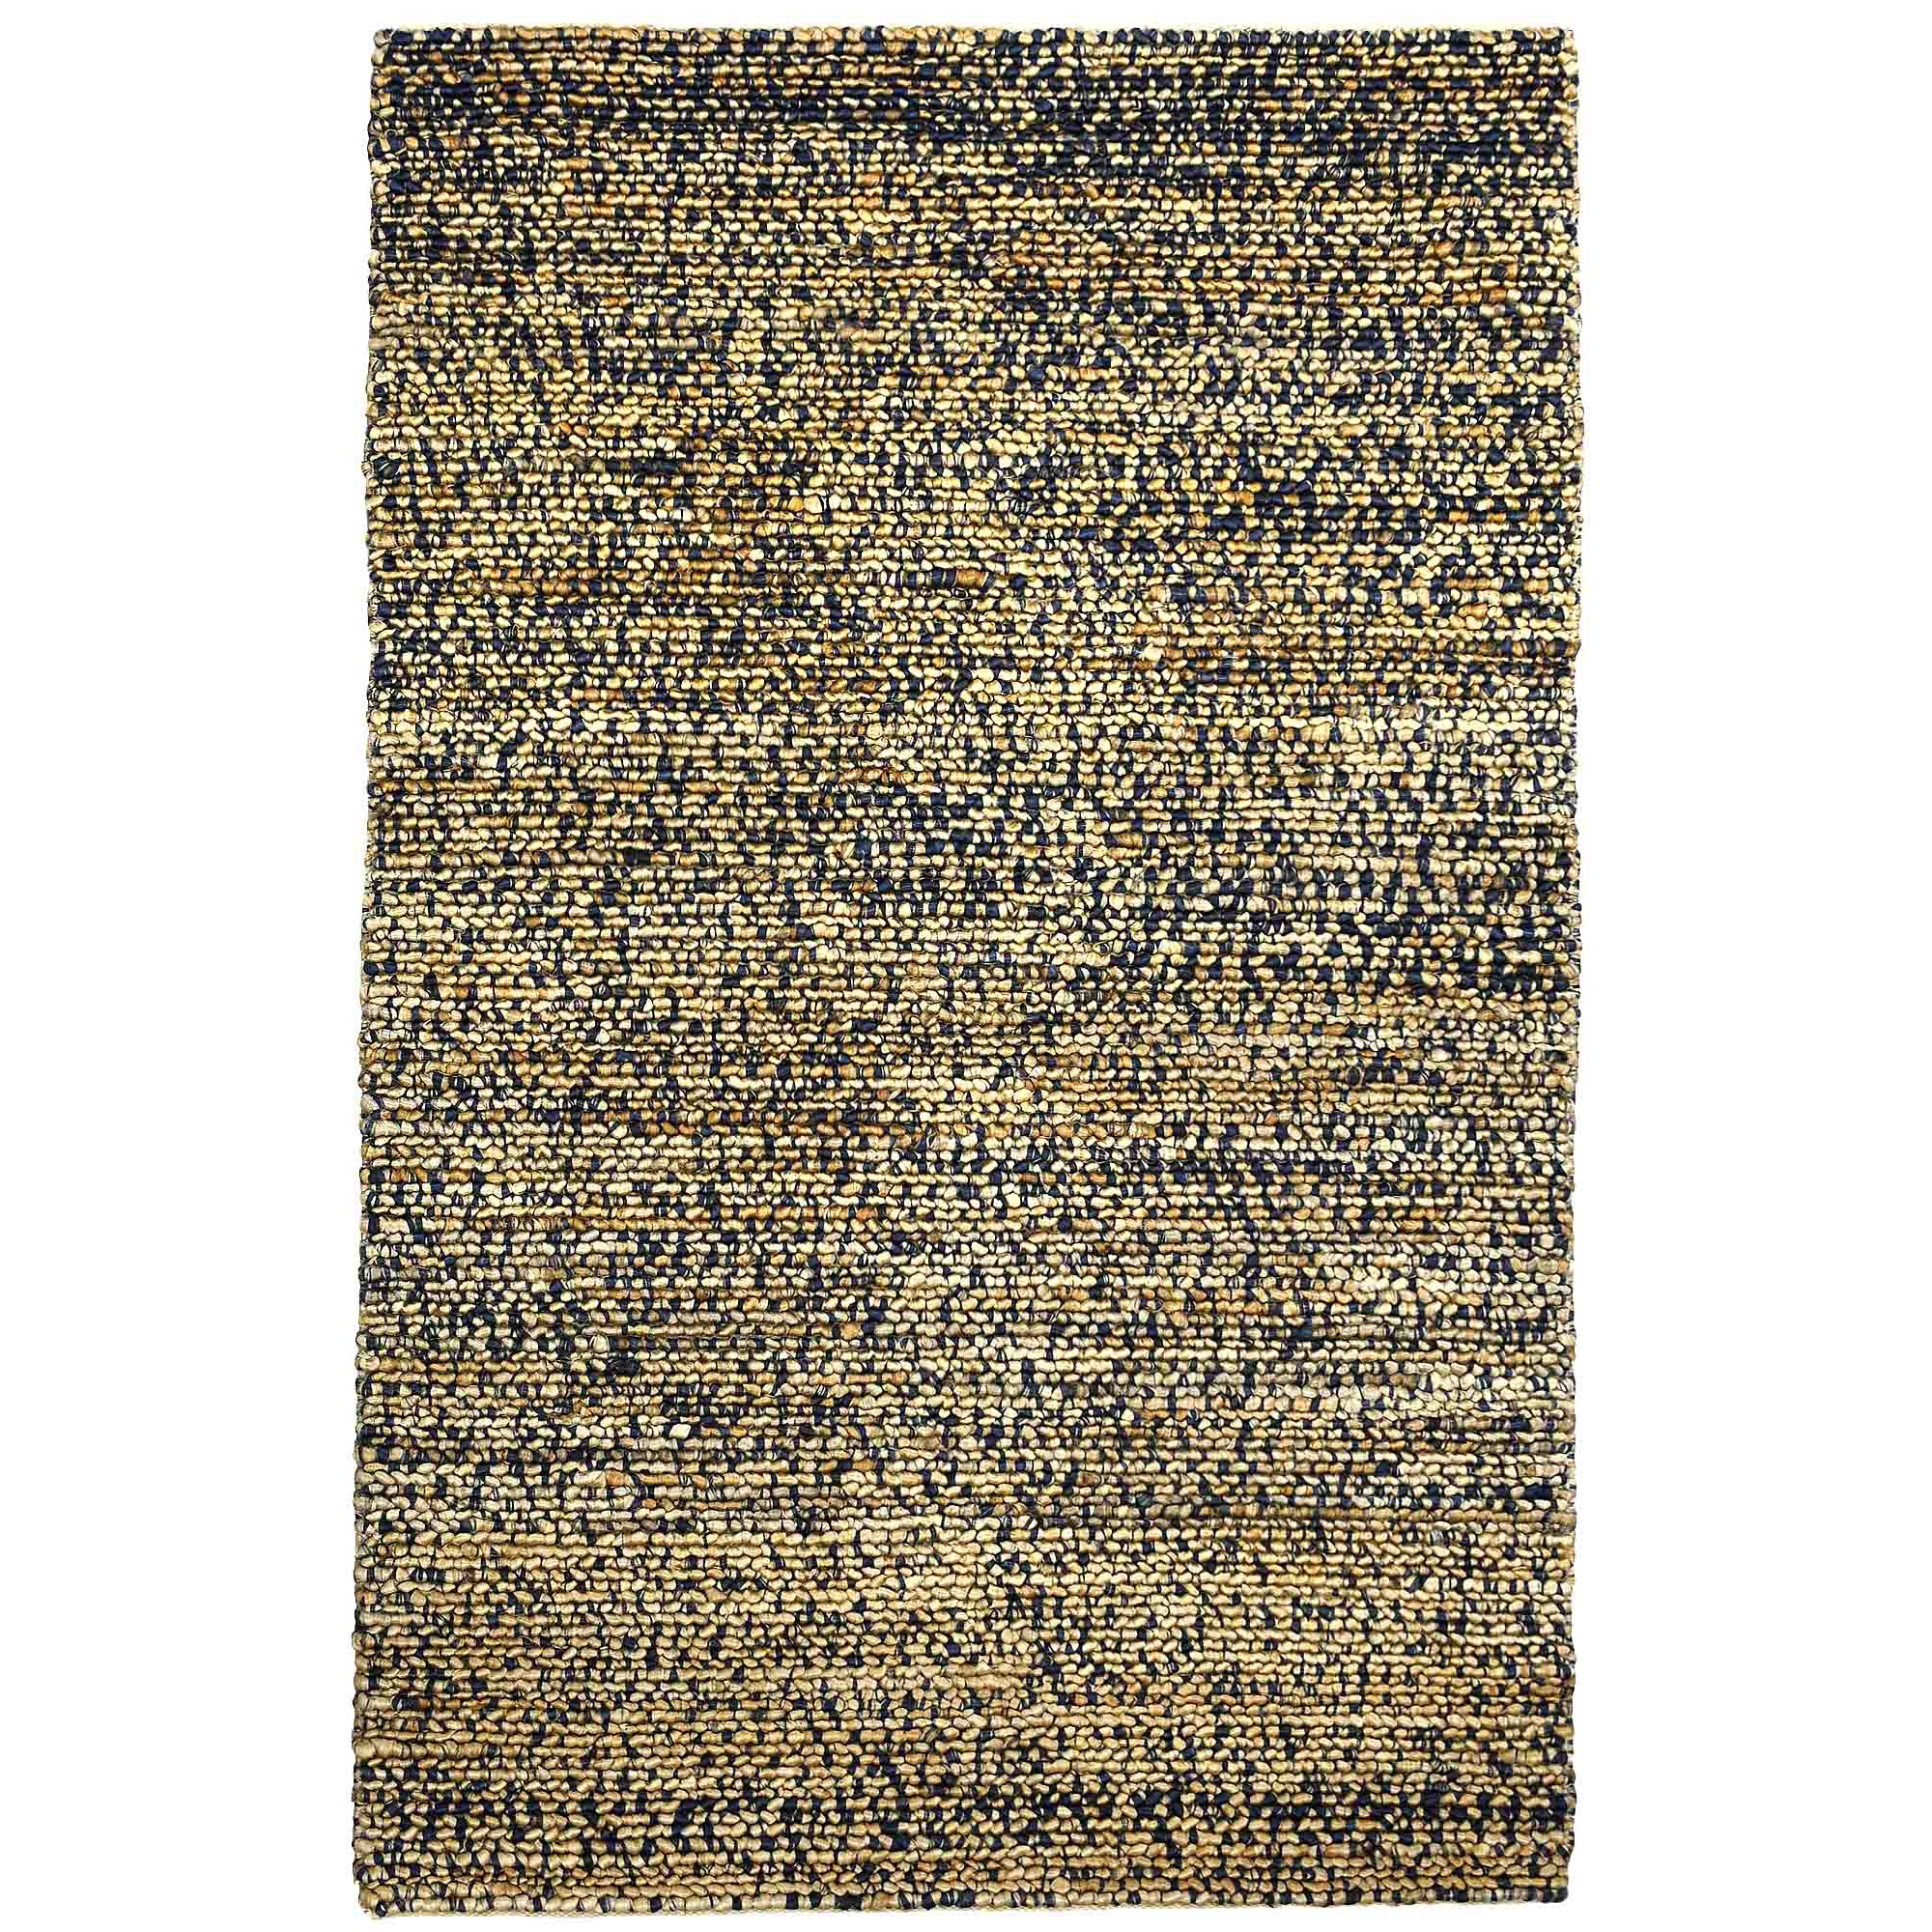 Anarchy Handwoven Natural Jute Rug